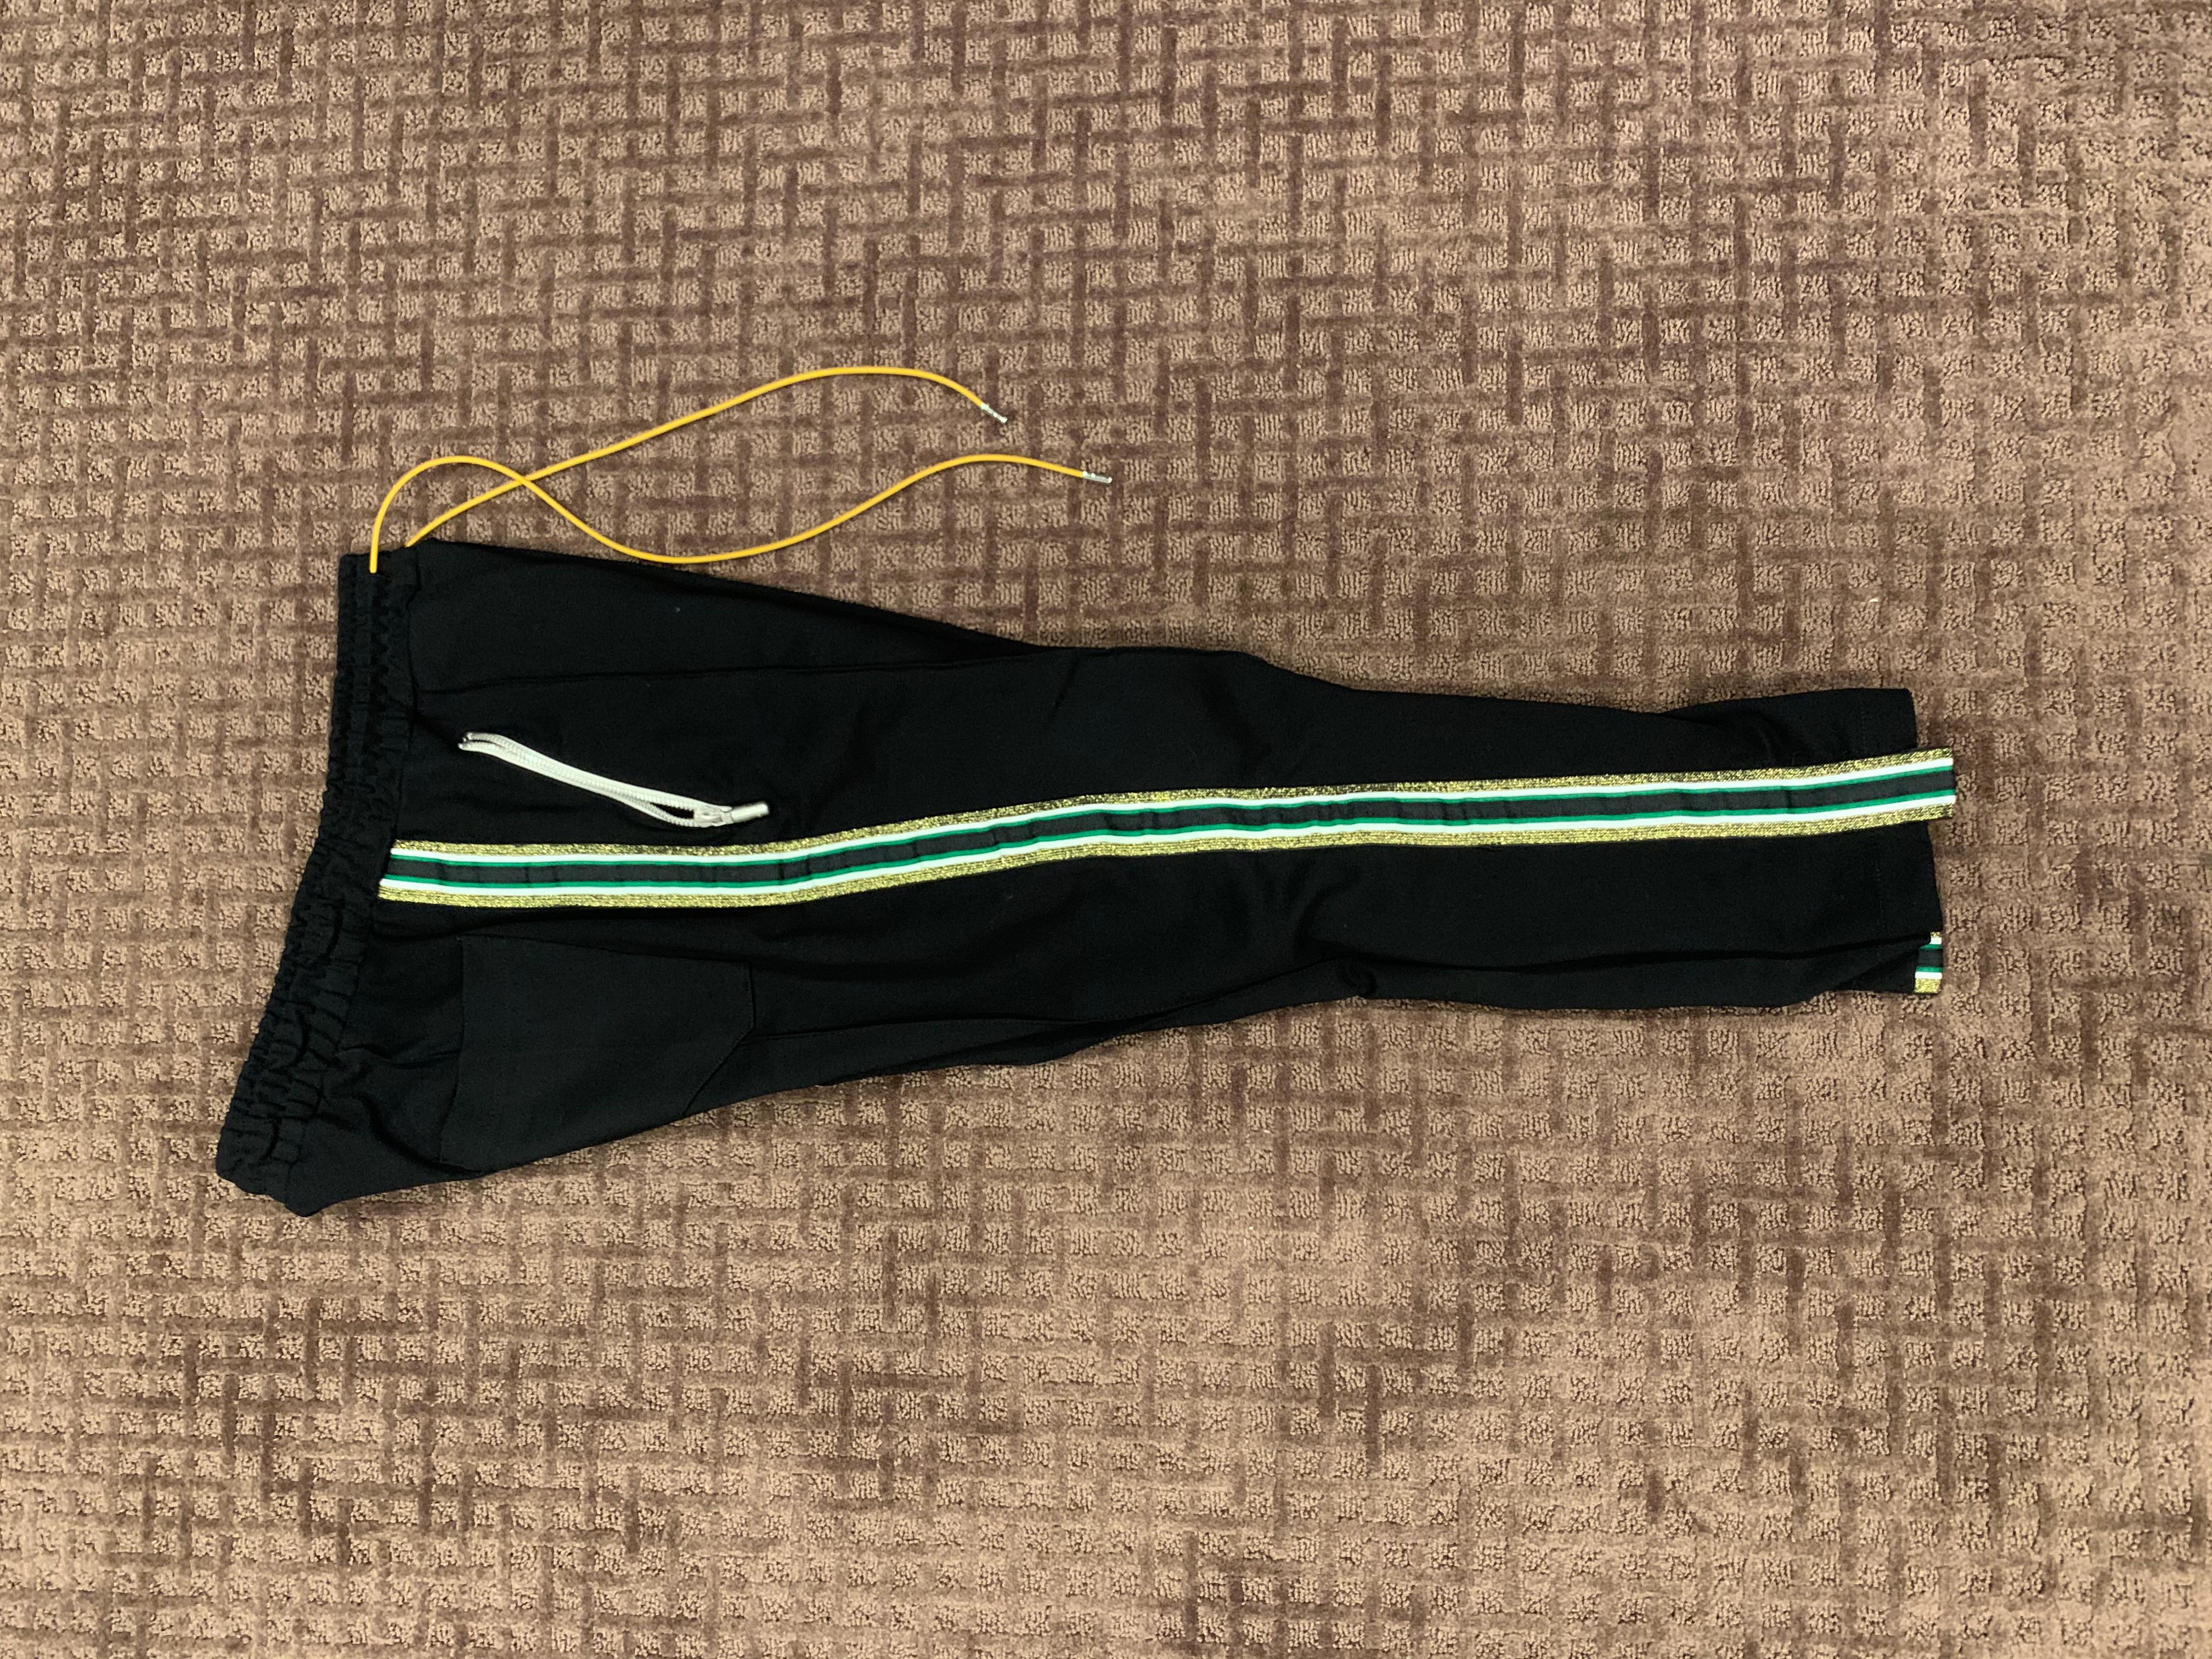 Size L
Excellent condition, however the stitching on the right leg slightly ripped in the front. Cannot notice when wearing. Never tried to fix it.
See pics for the flaw
Retails for near $750

Waist: 15.5